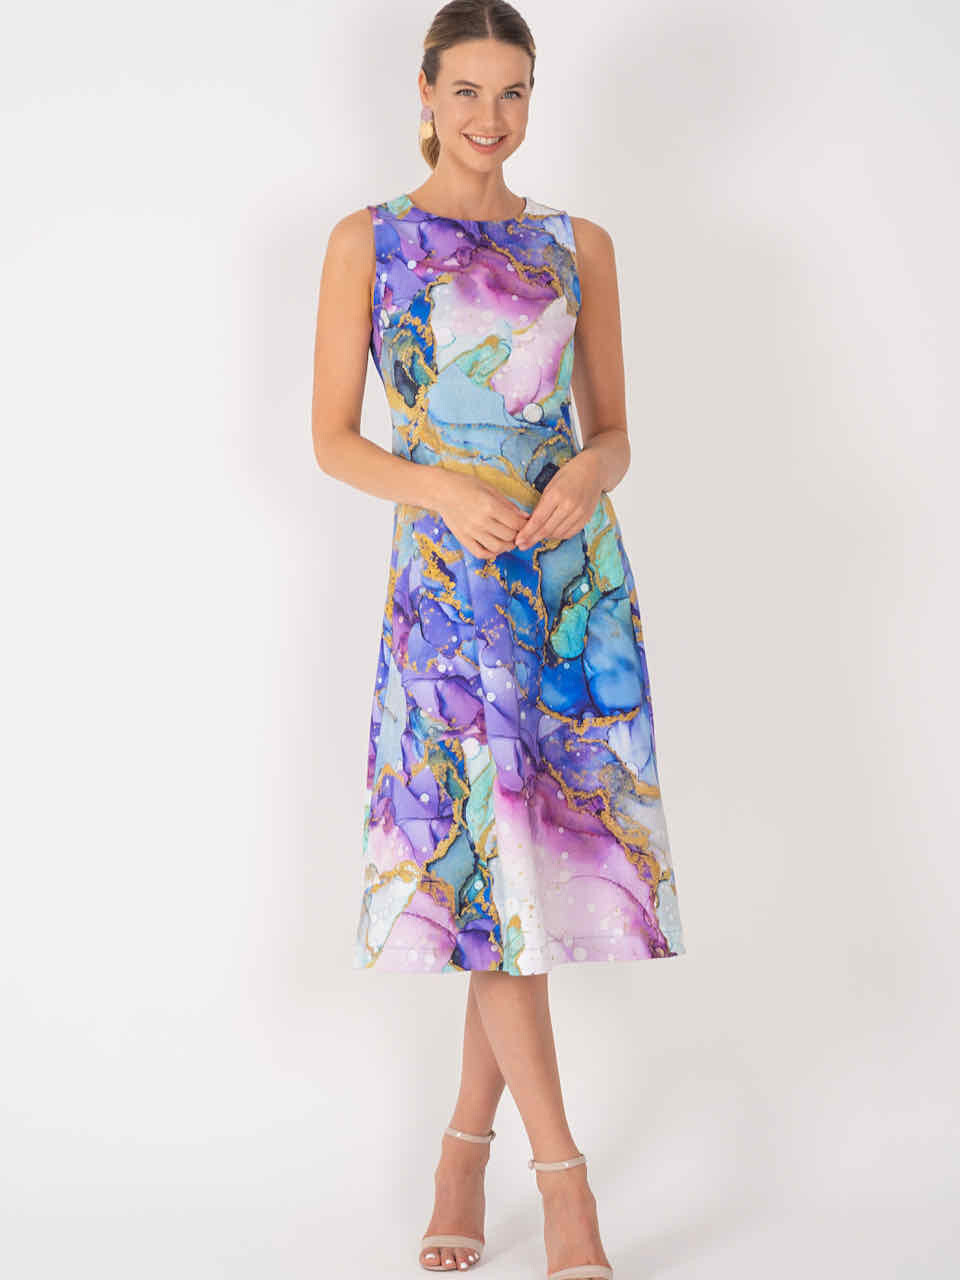 Simply Art Dolcezza: Moody Mermaid Bubble Abstract Art Midi Dress SOLD OUT